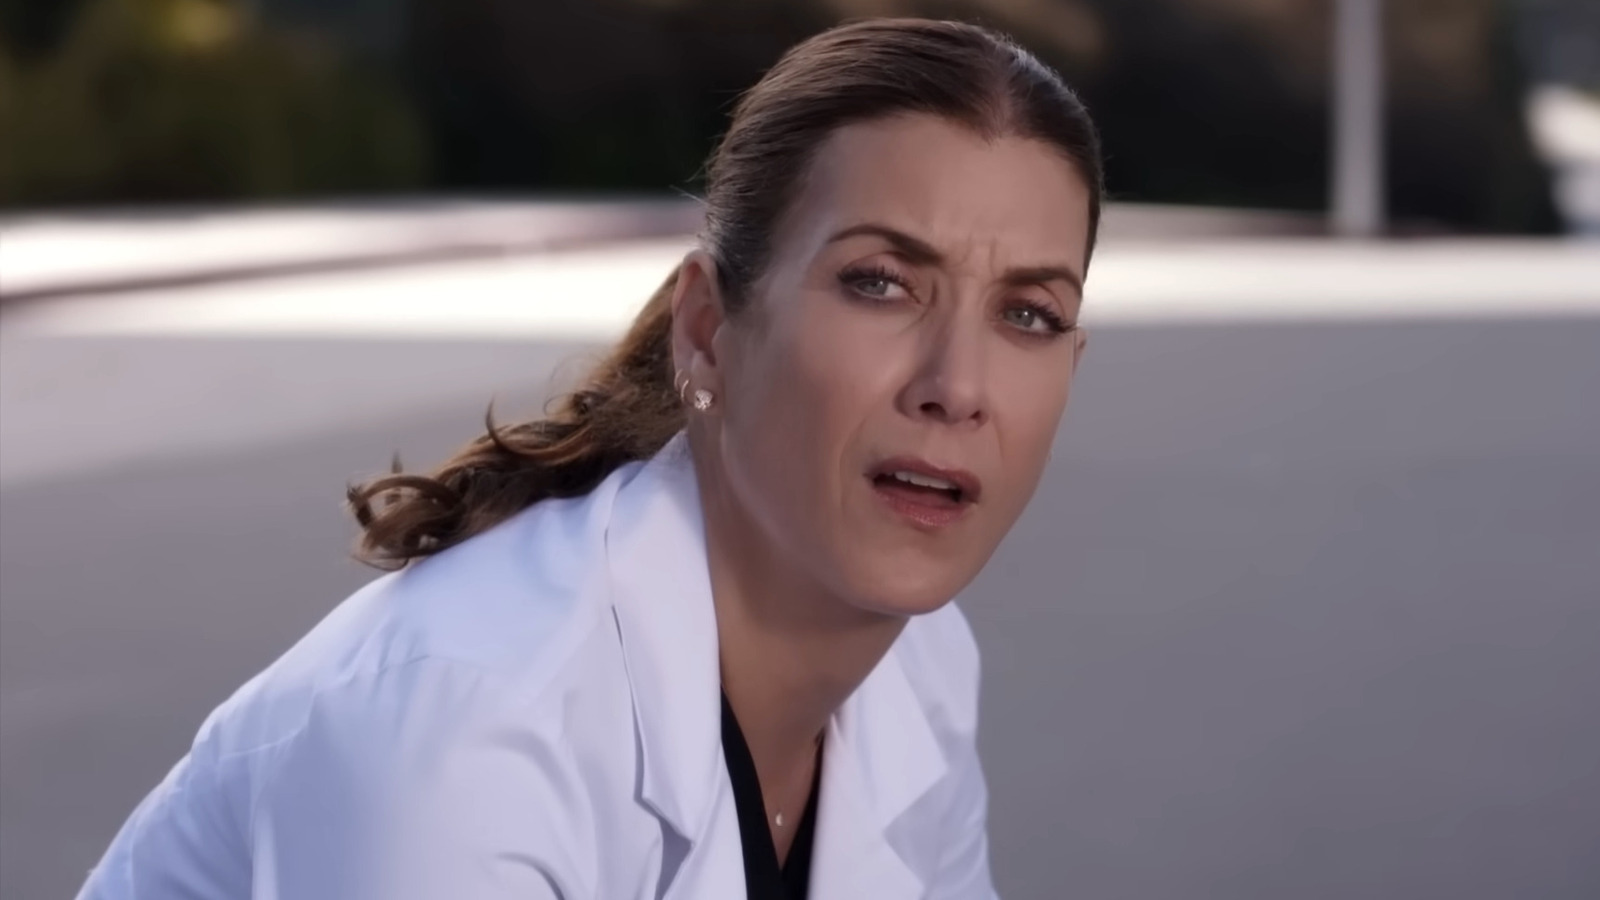 Grey S Anatomy S19 Episode 12 Promo Has Fans Worried About Addison